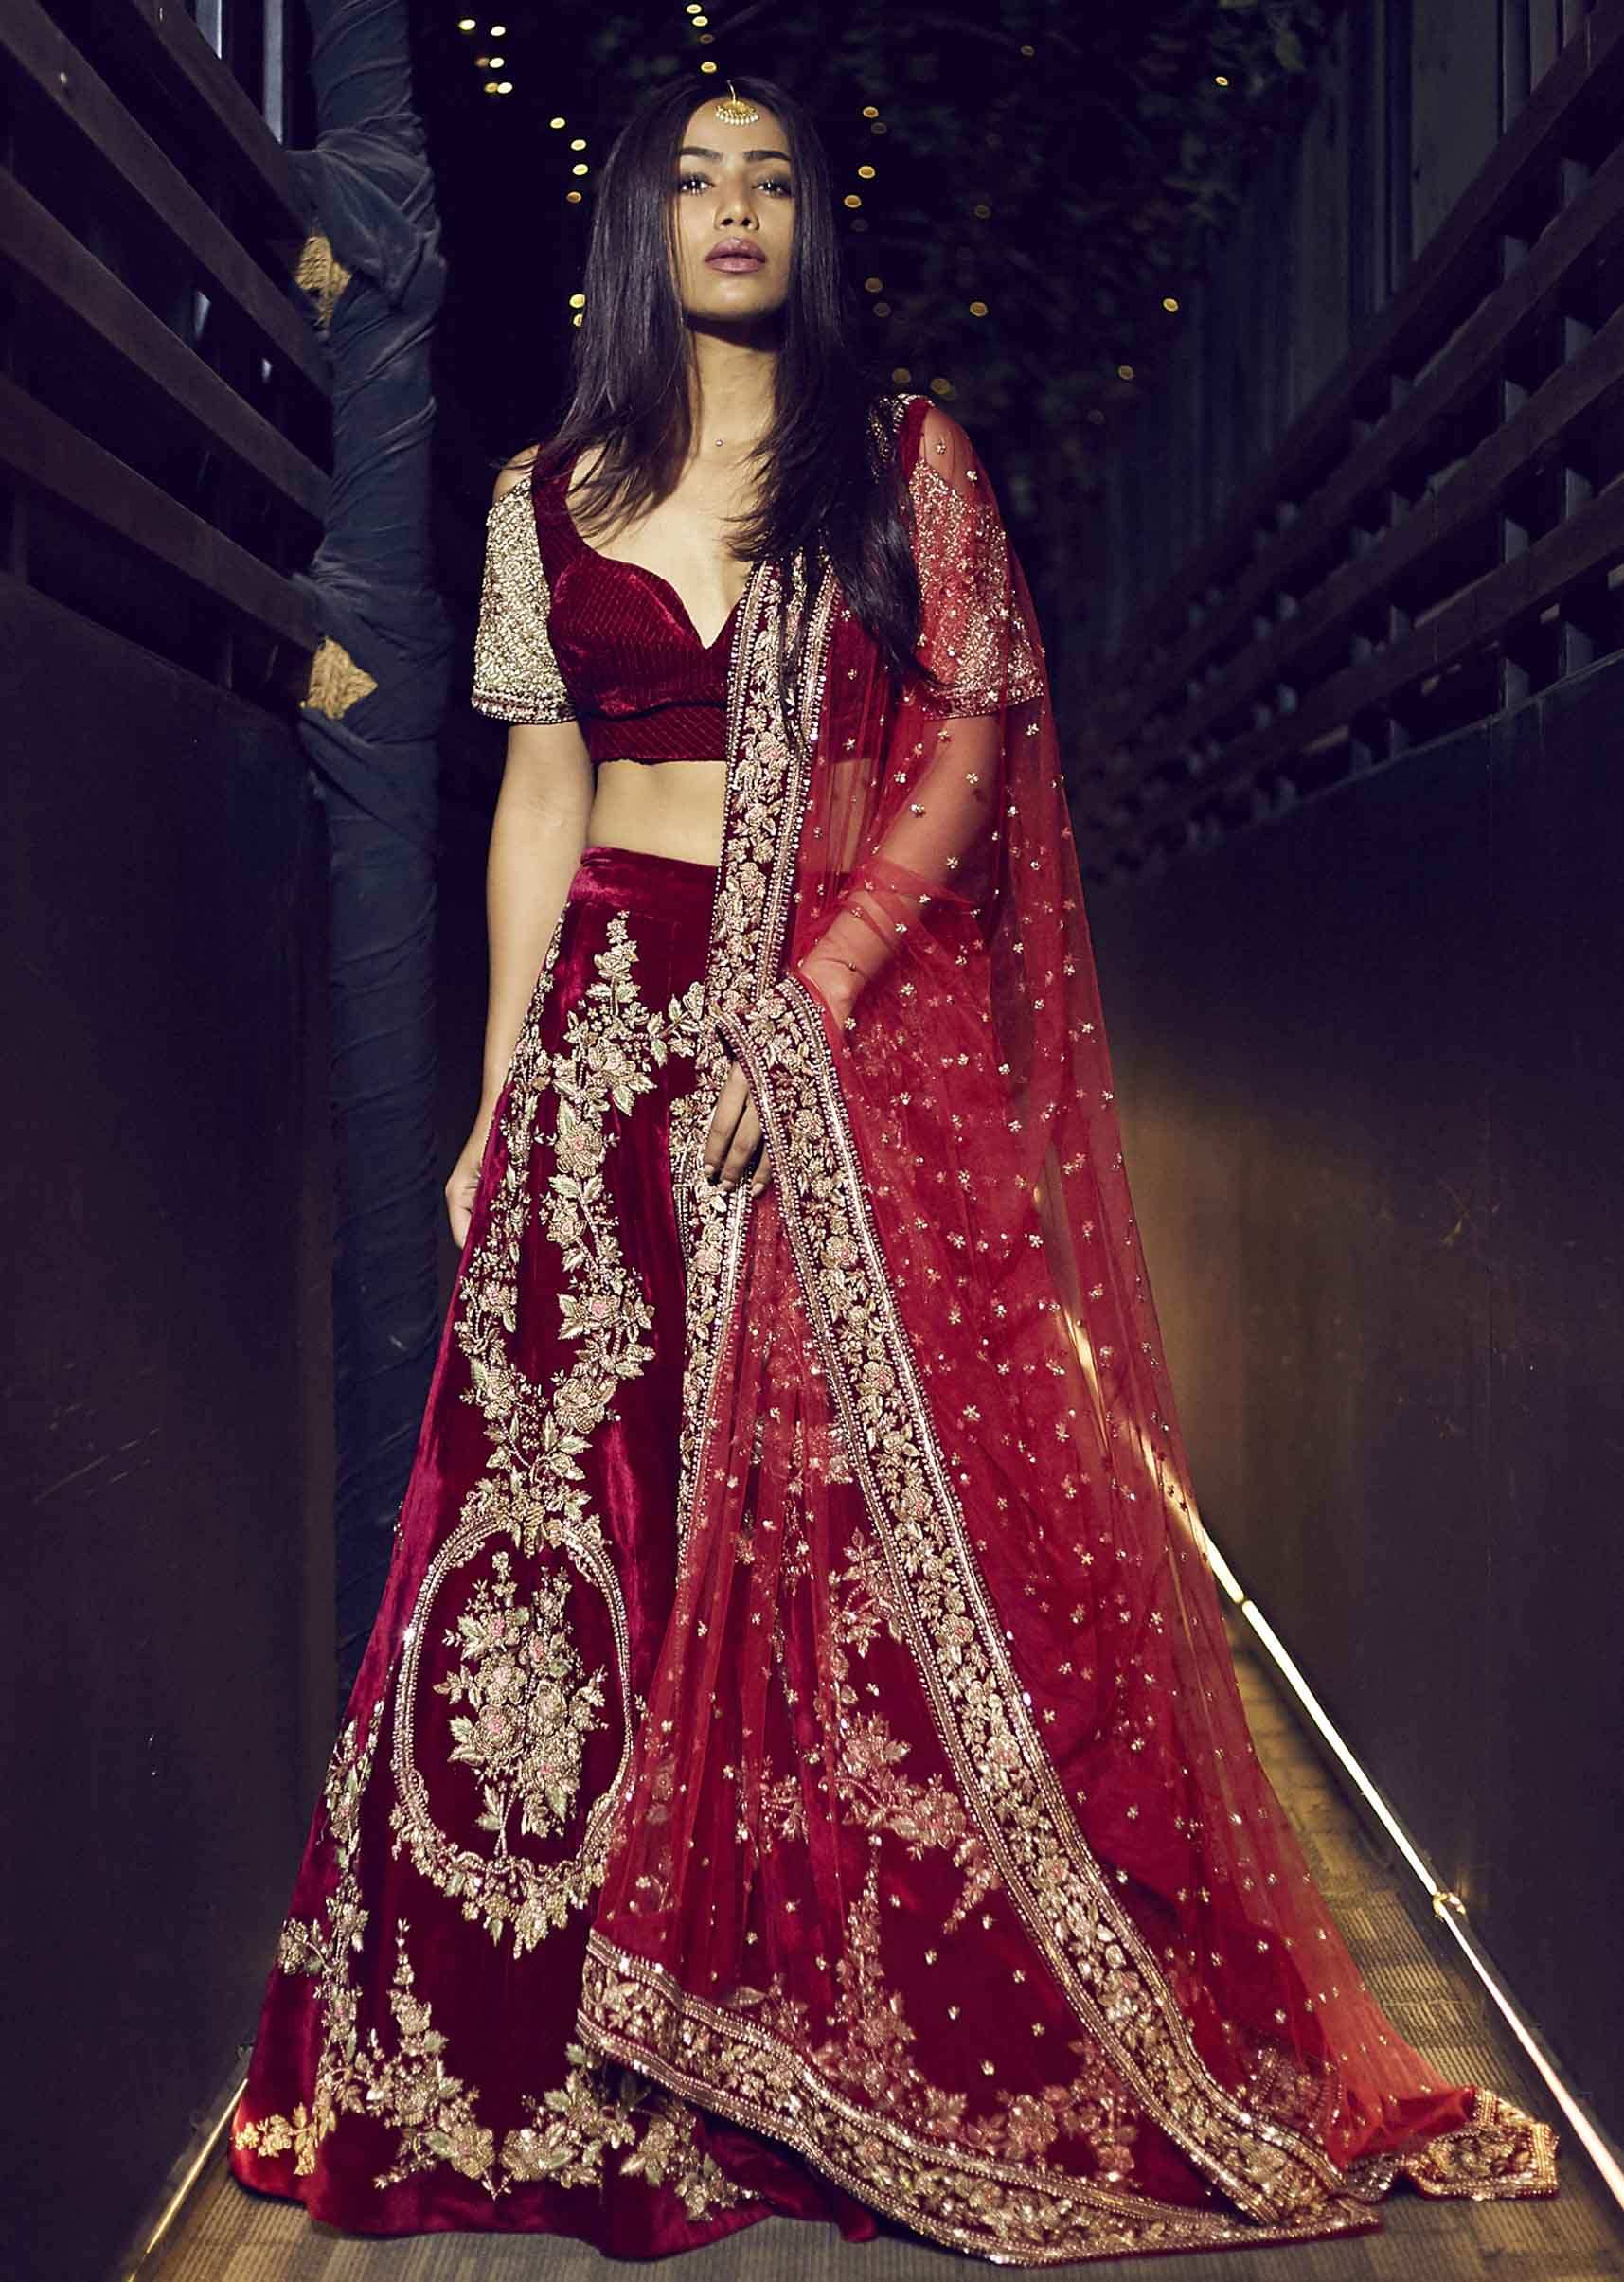 Featuring red velvet lehenga embellished in floral motif embroidery